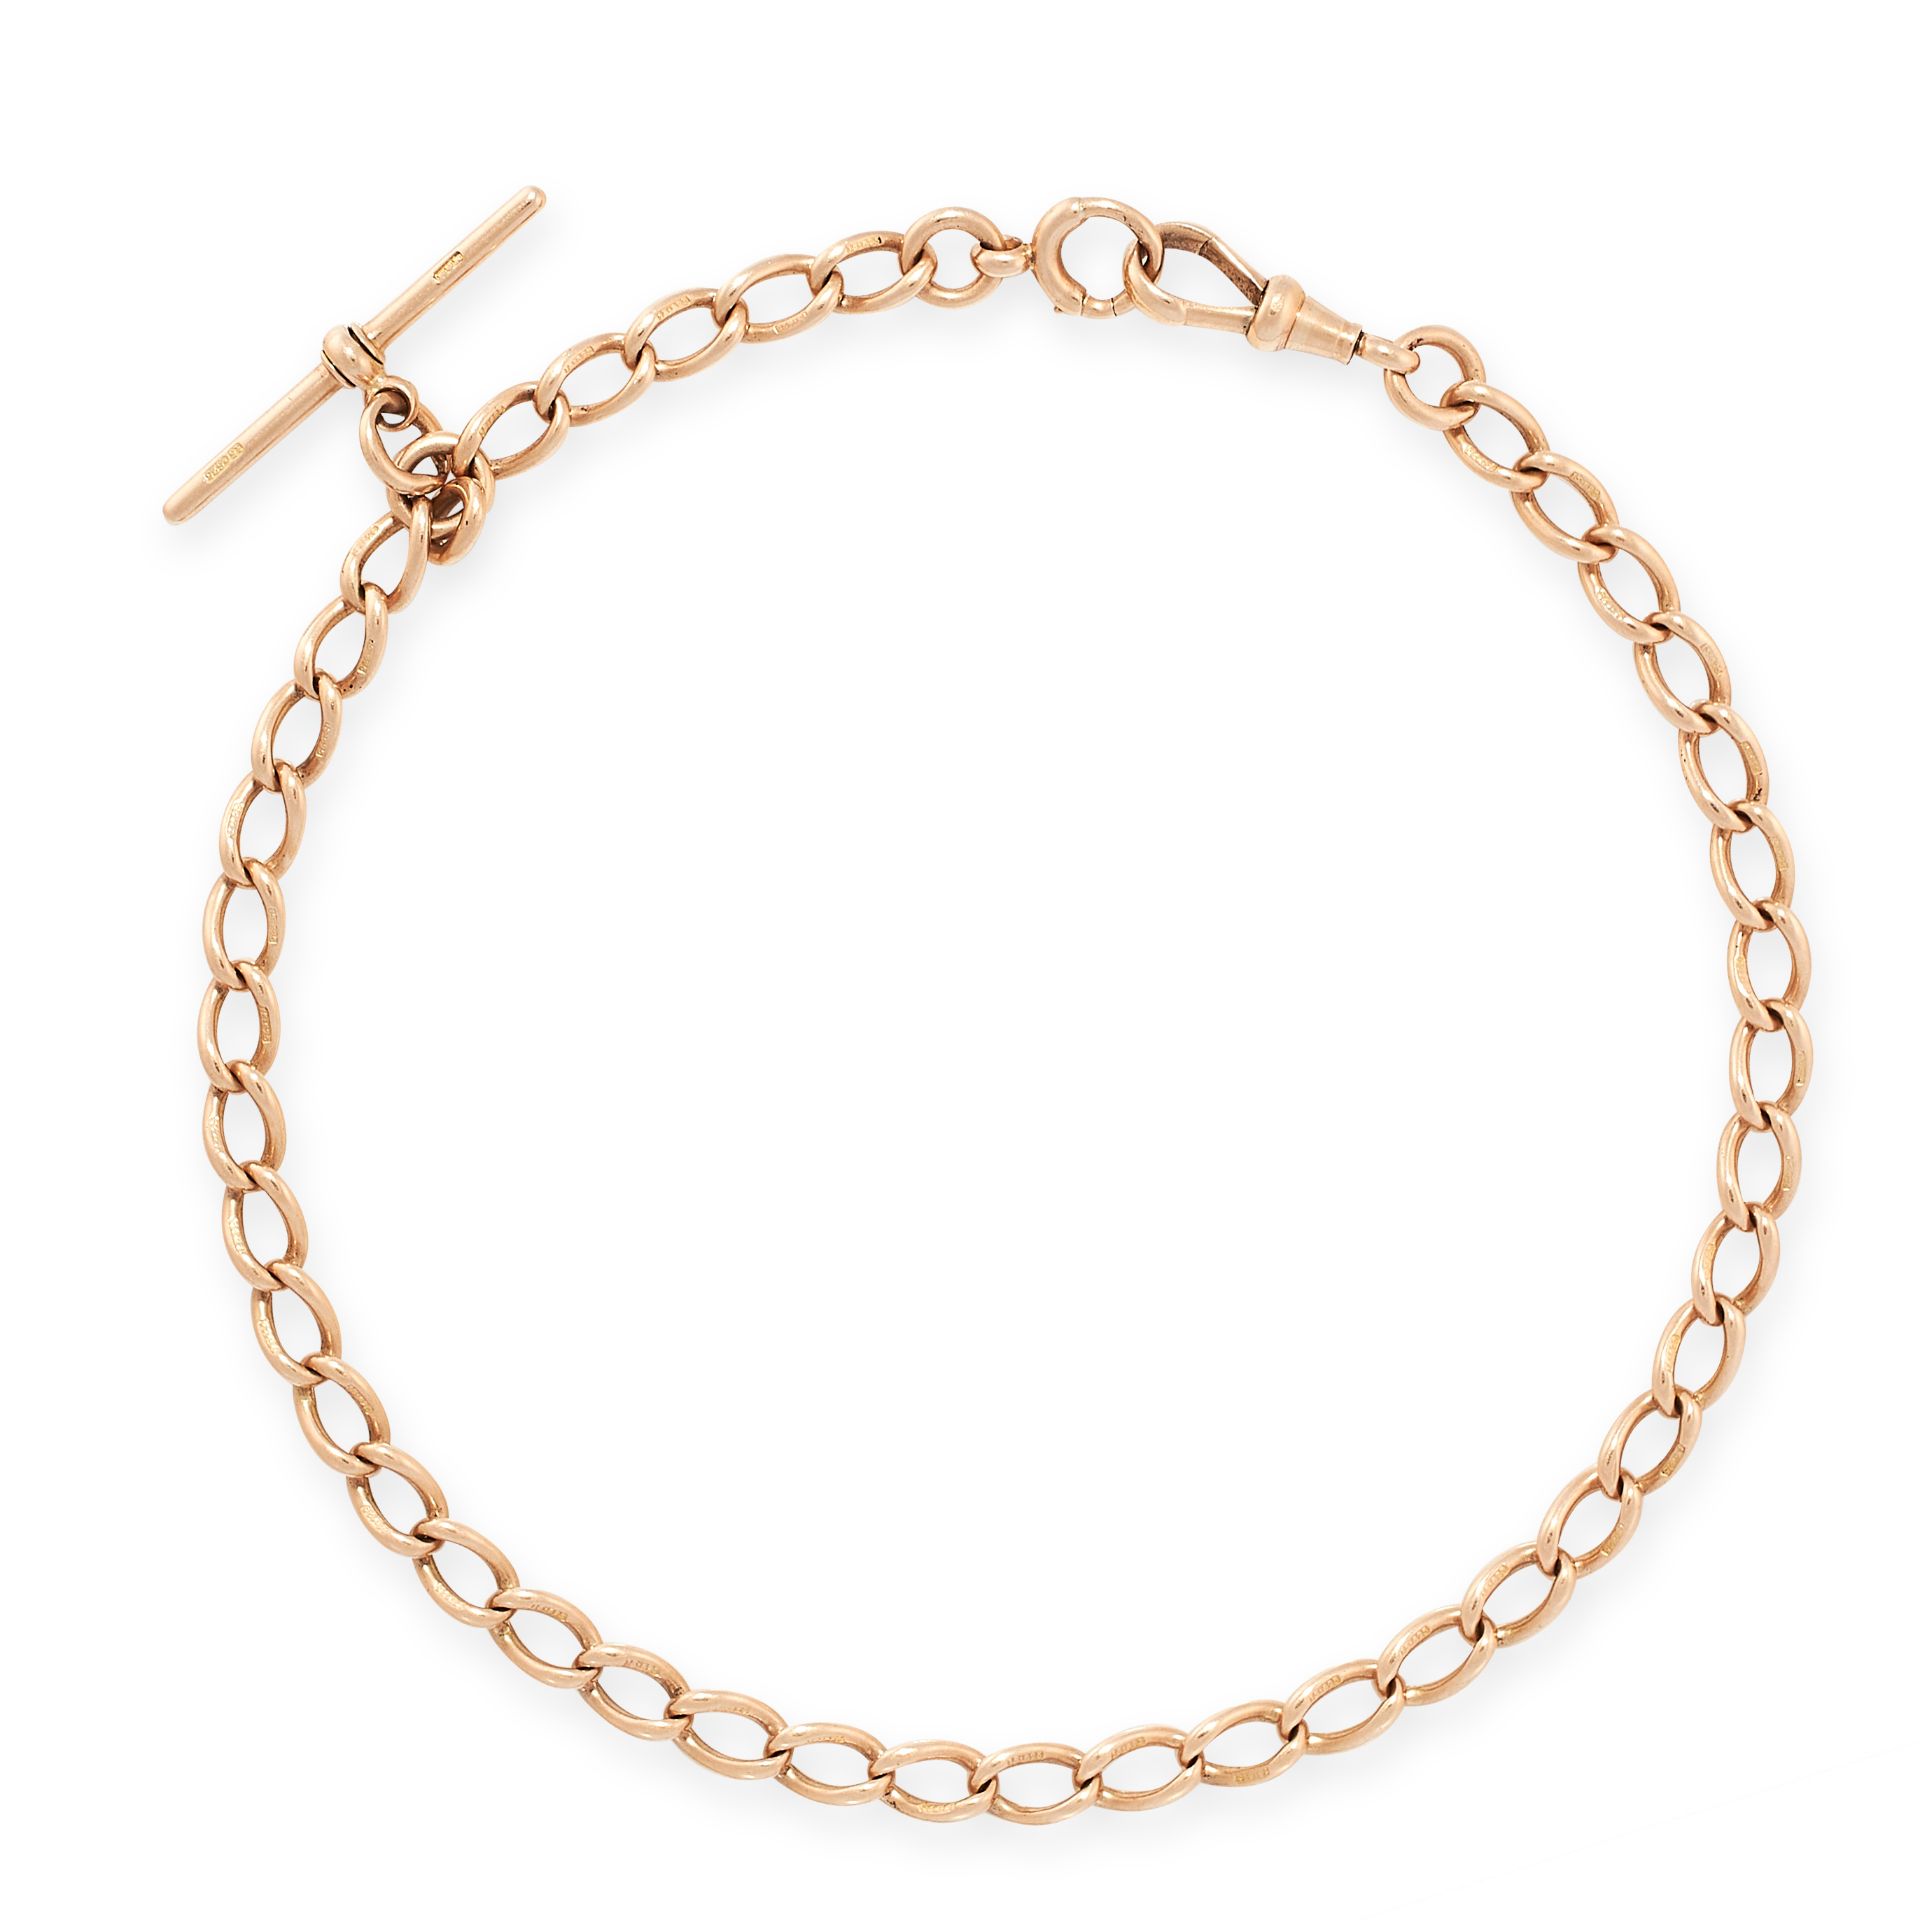 AN ANTIQUE ALBERT CHAIN NECKLACE in 15ct rose gold, formed of a series of curb links, suspending a